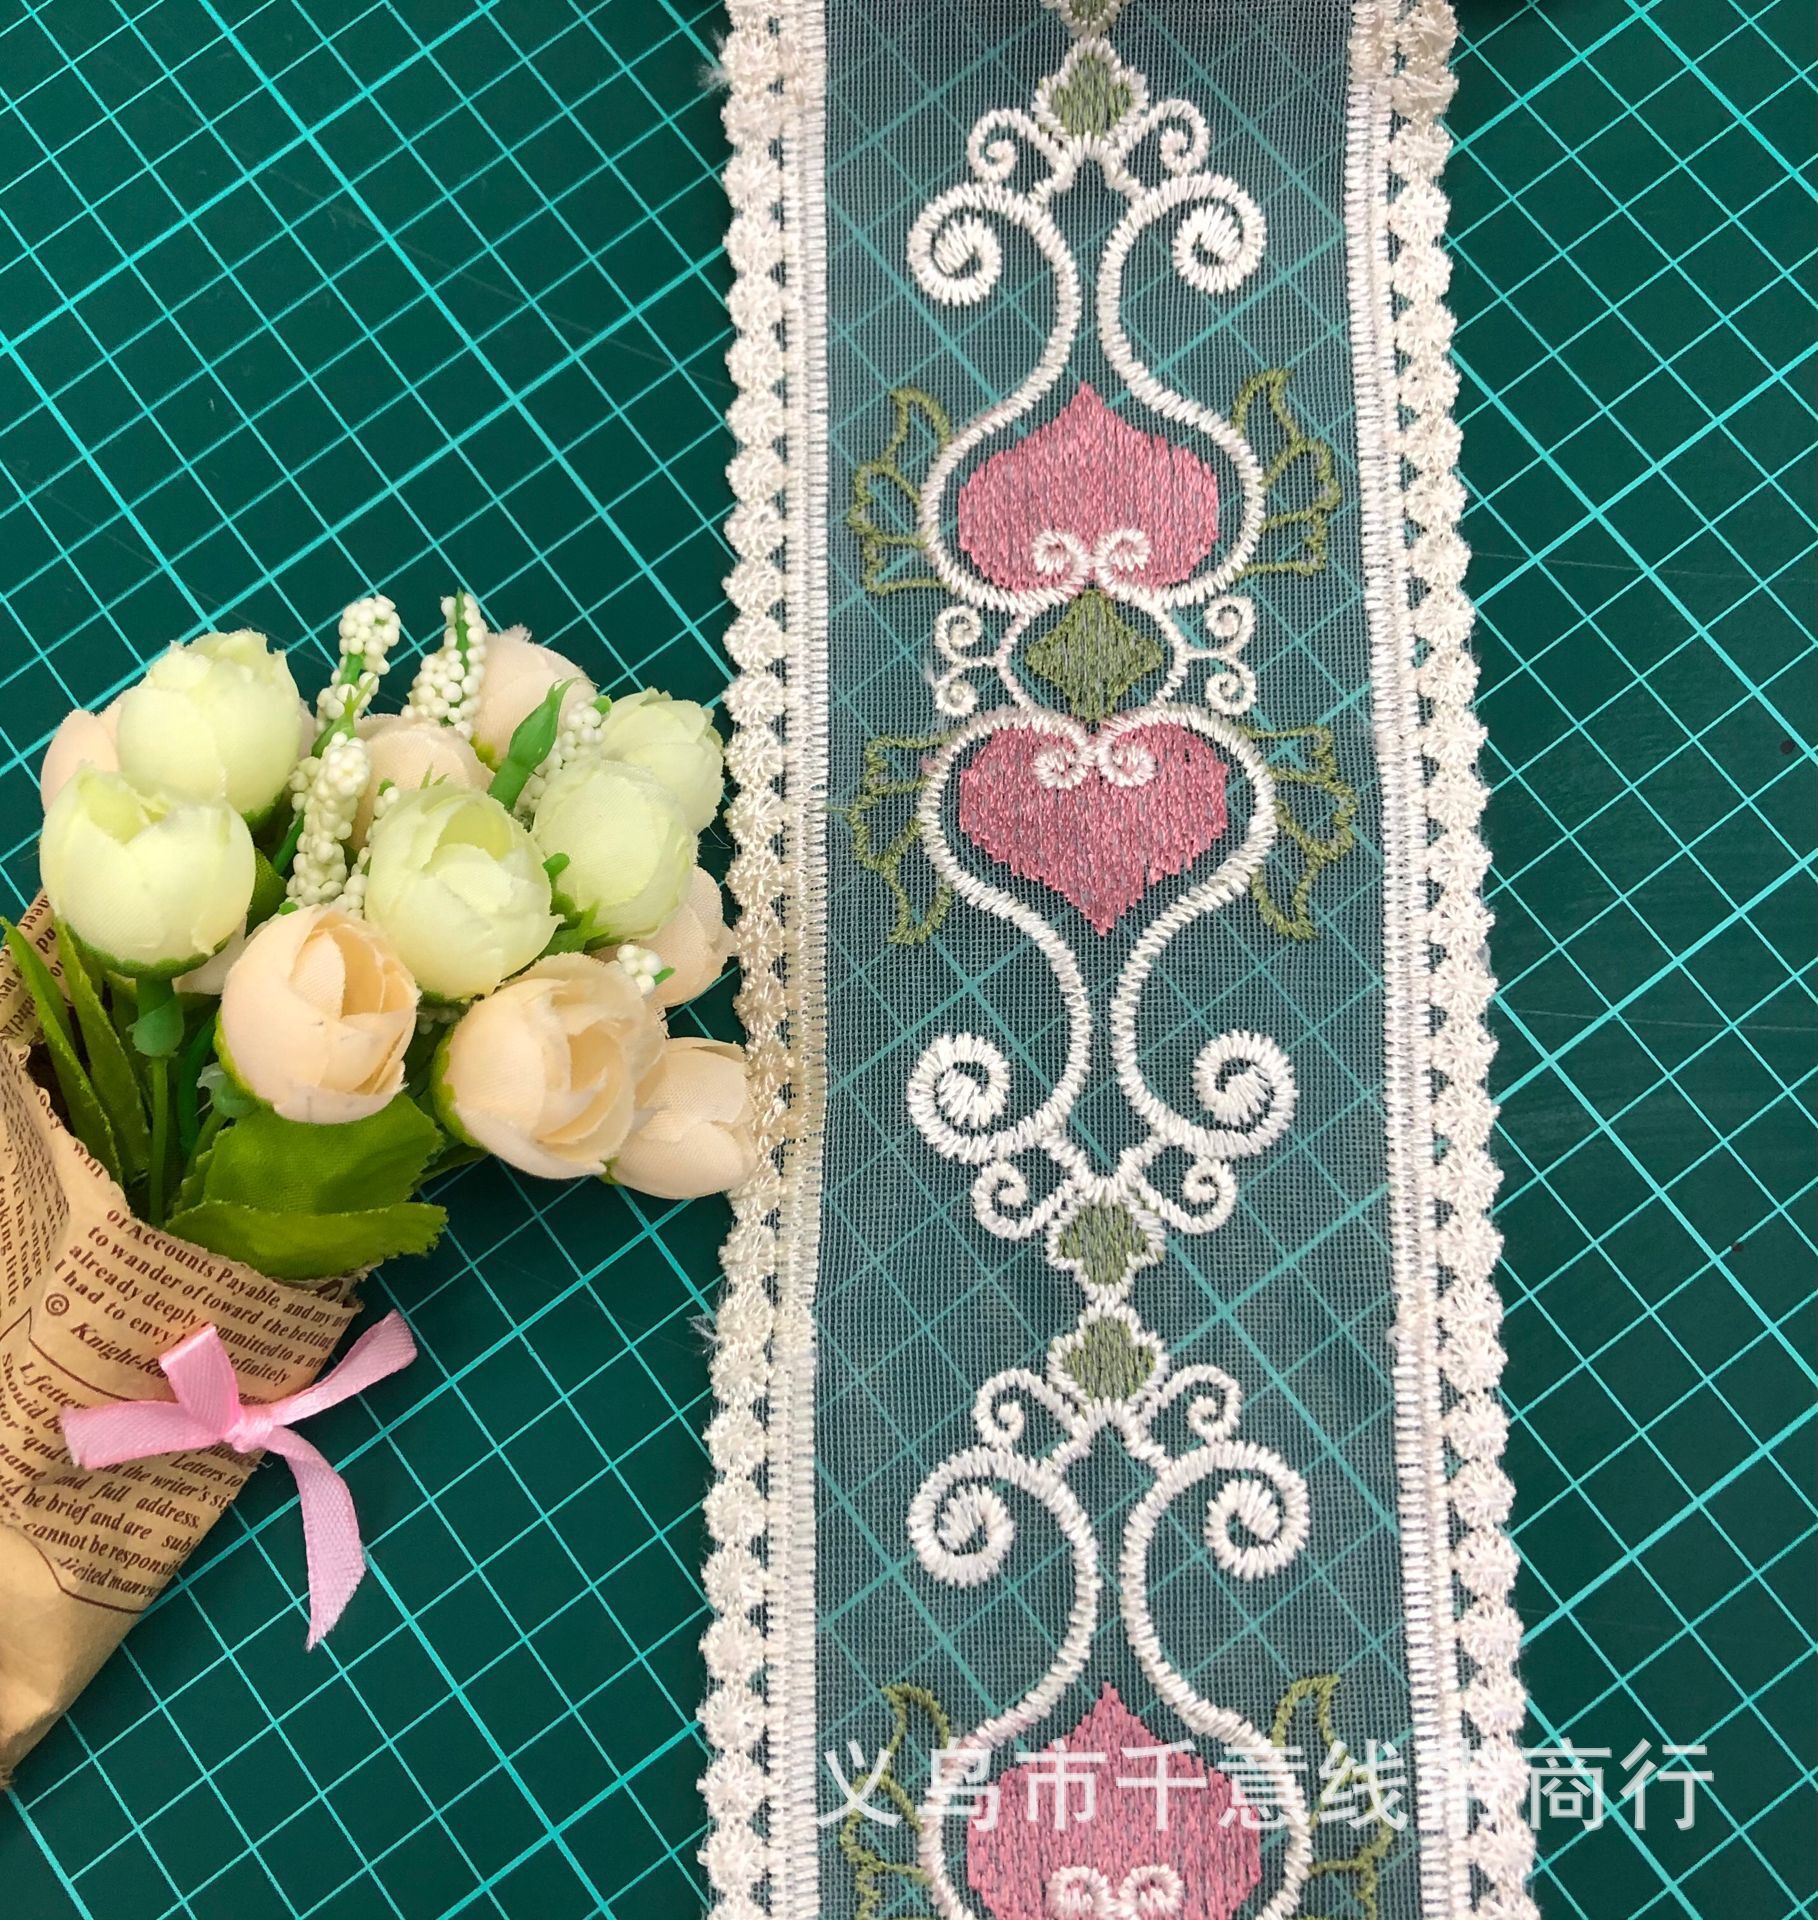 In Stock Wholesale Mesh Embroidery 8cm Milk Silk Wedding Dress Home Textile Fabric Embroidery Bar Code Decoration Accessories